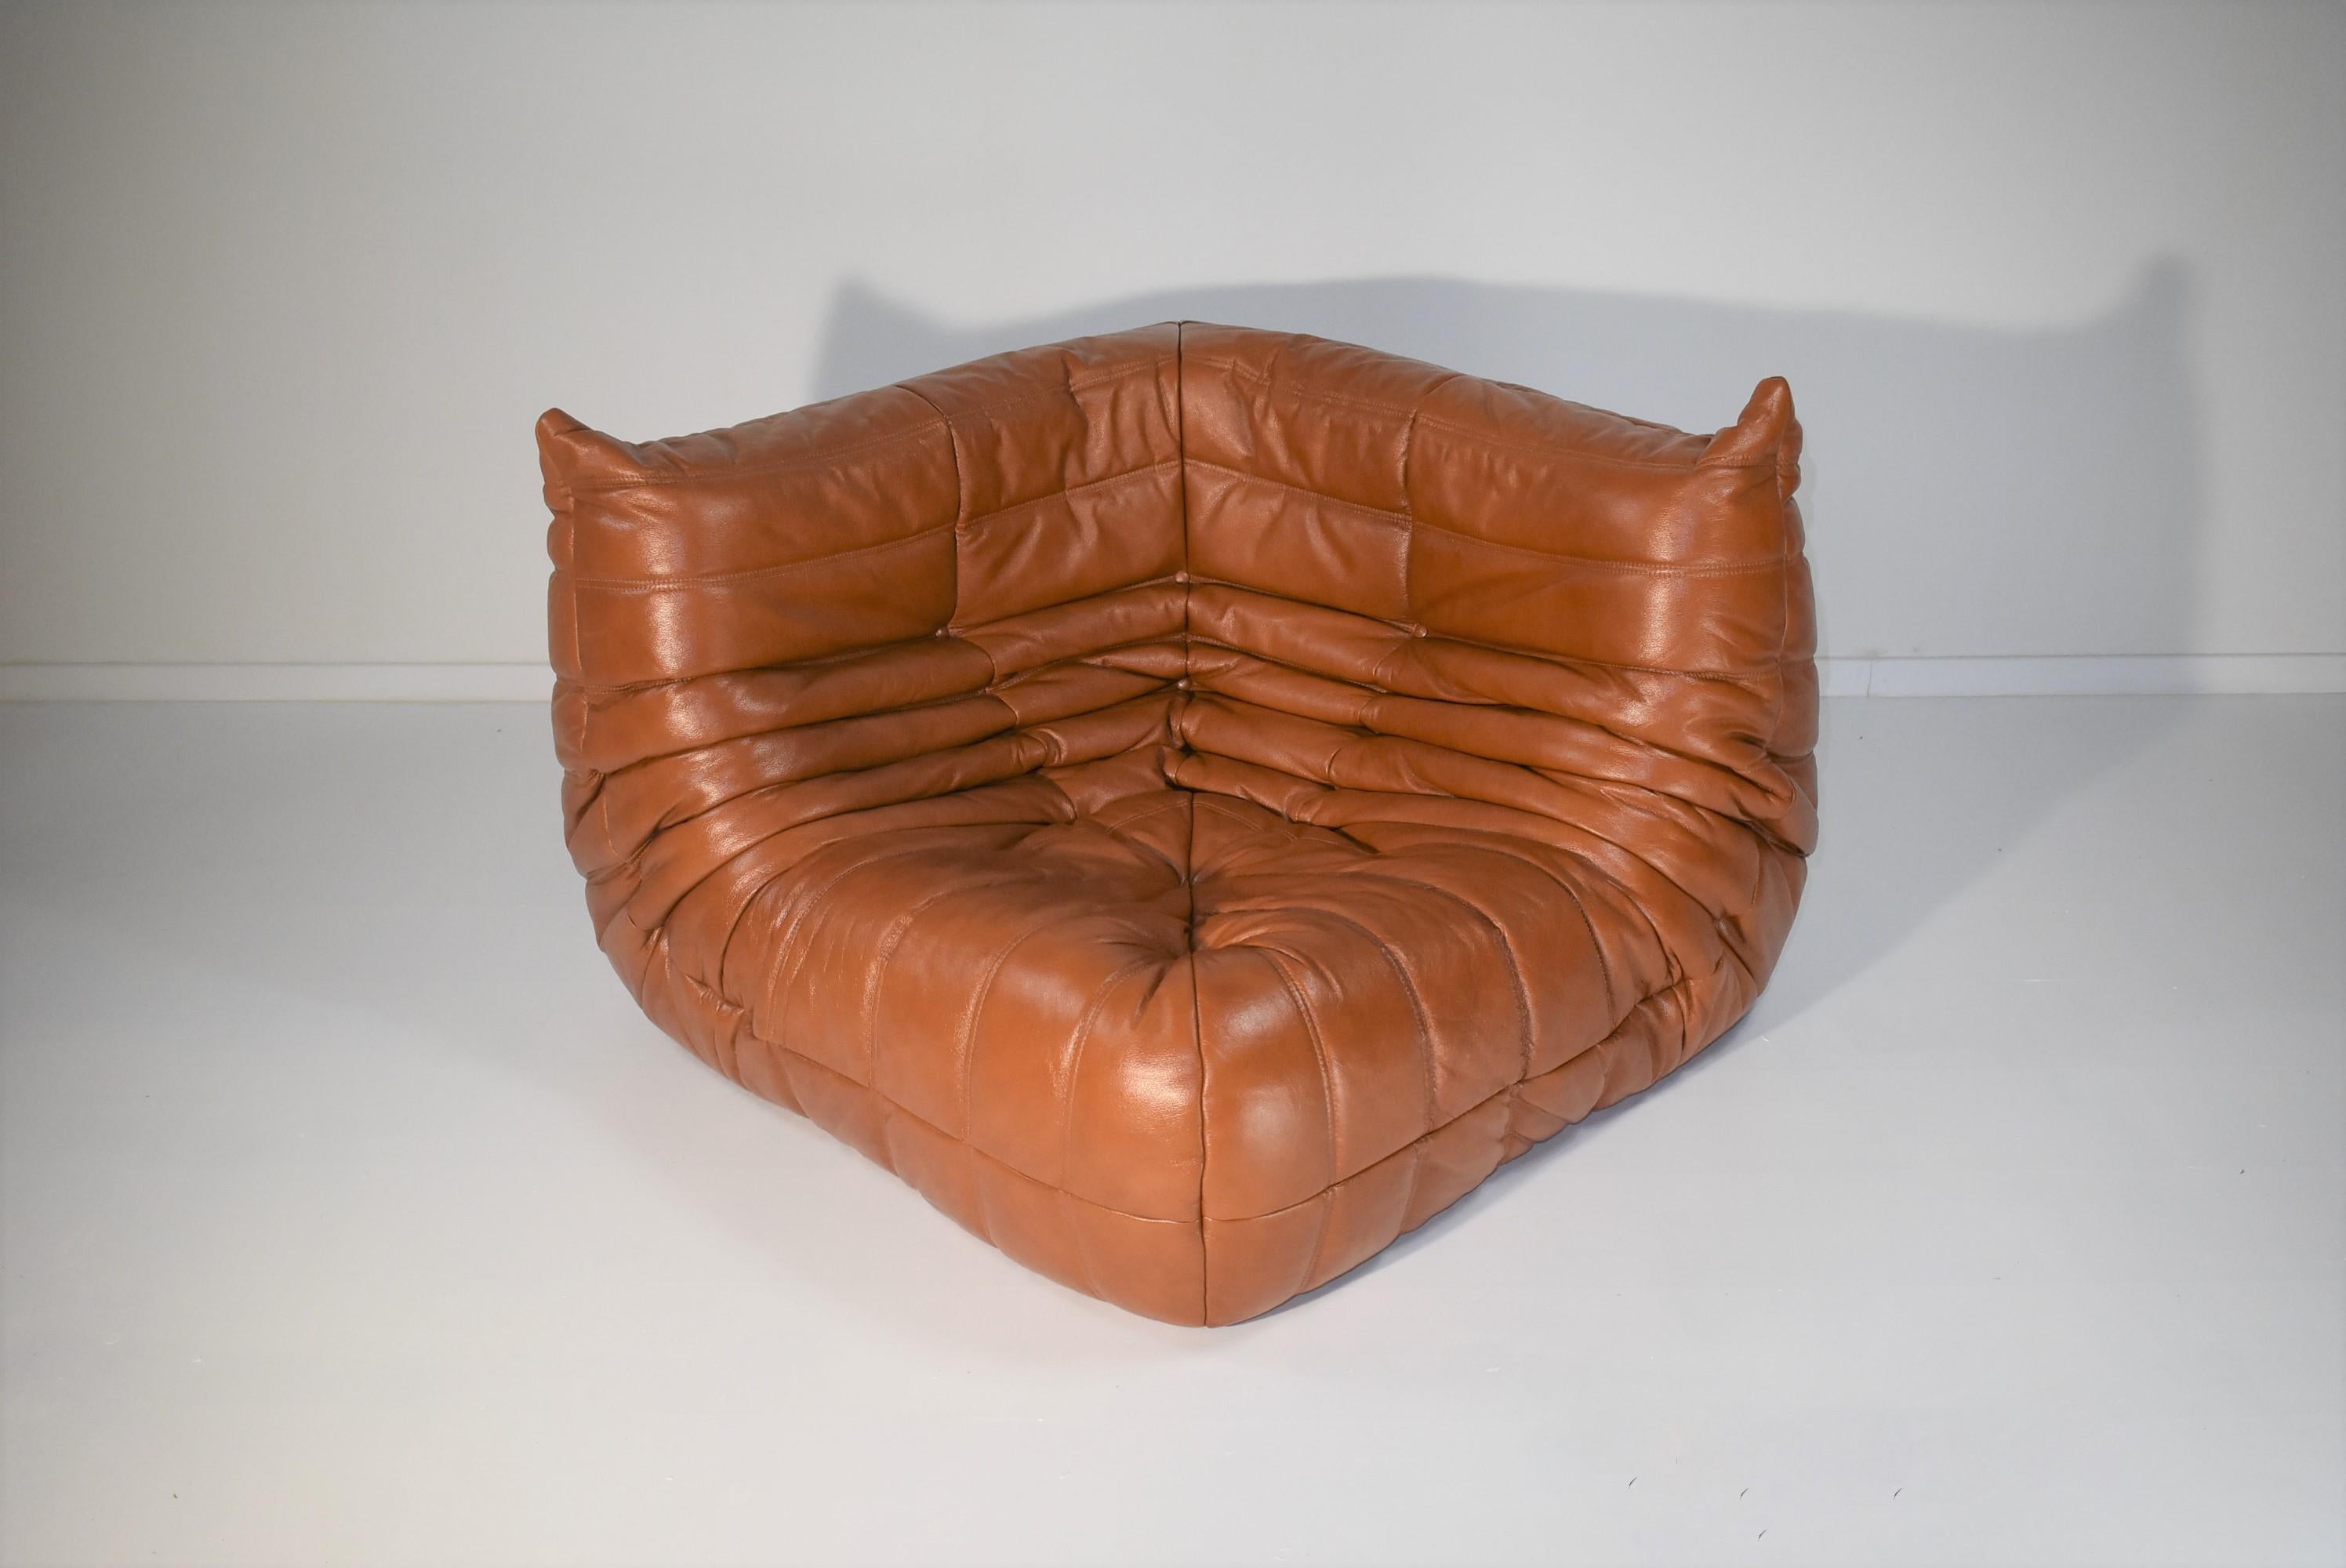 The Togo was designed by Michel Ducaroy in 1973 but is still very popular today. This “Large Settee” is refurbished. That means that old weak parts of foam have been replaced by new parts of firm foam. Thereafter the sofa is reupholstered in fine